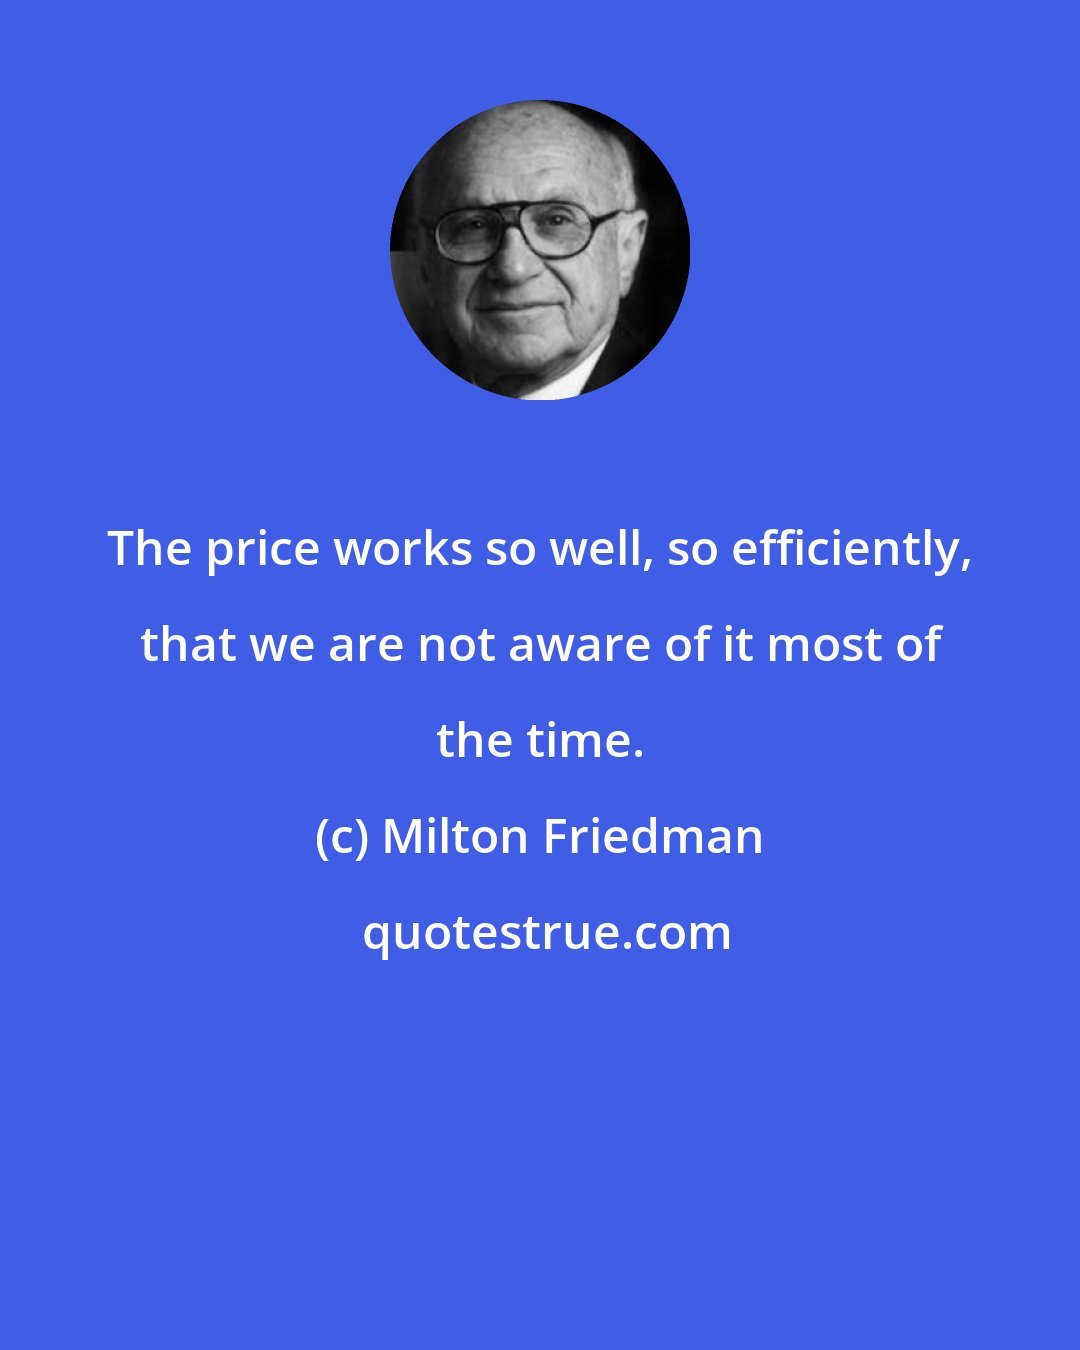 Milton Friedman: The price works so well, so efficiently, that we are not aware of it most of the time.